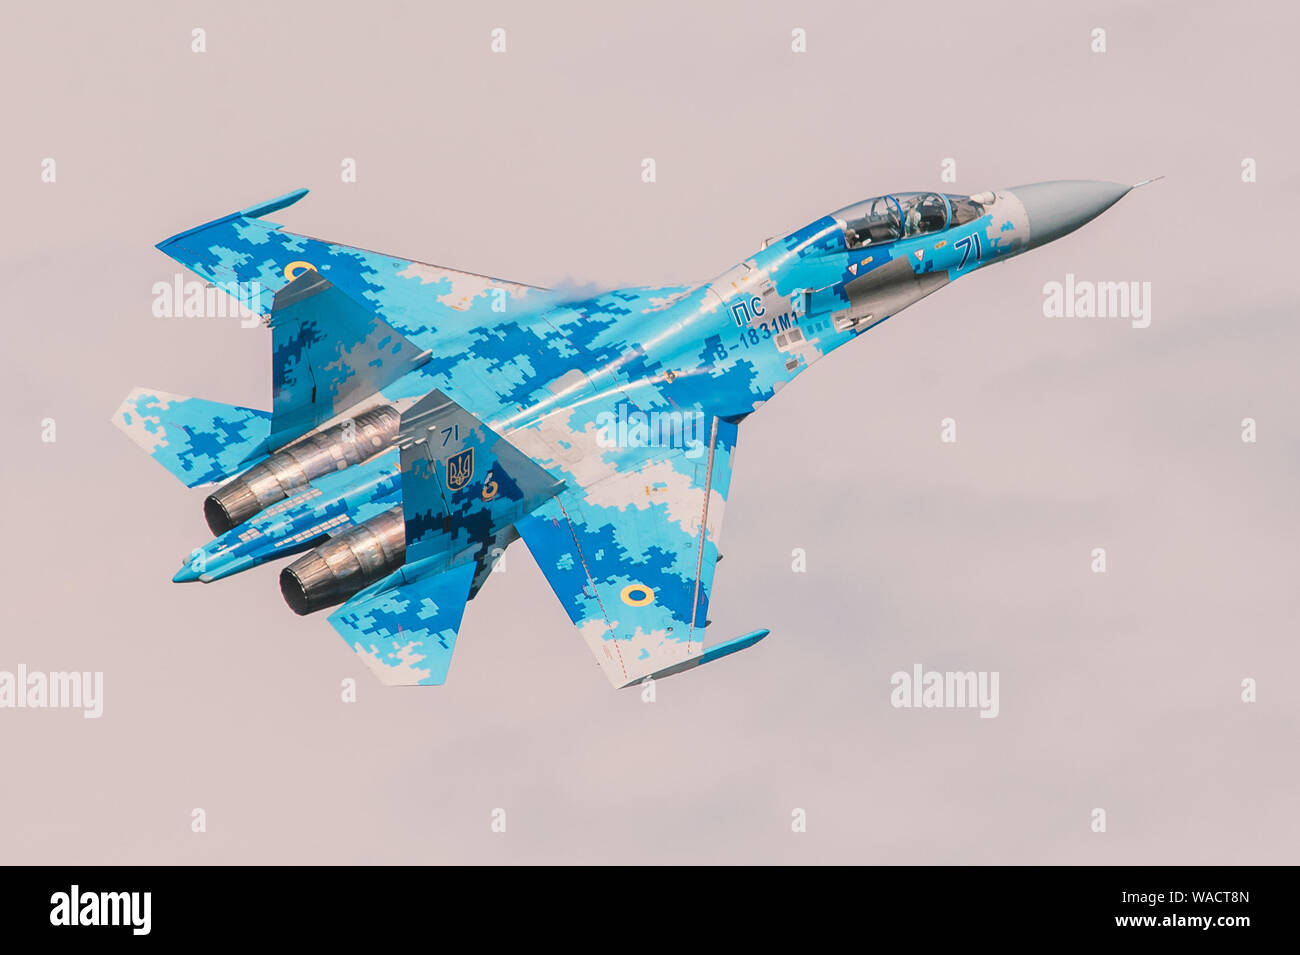 Ukrainian Air Force Sukhoi Su-27UB 'Flanker' Blue 71 from 831st Tactical Aviation Brigade performing an airshow routine in Radom, Poland. Stock Photo